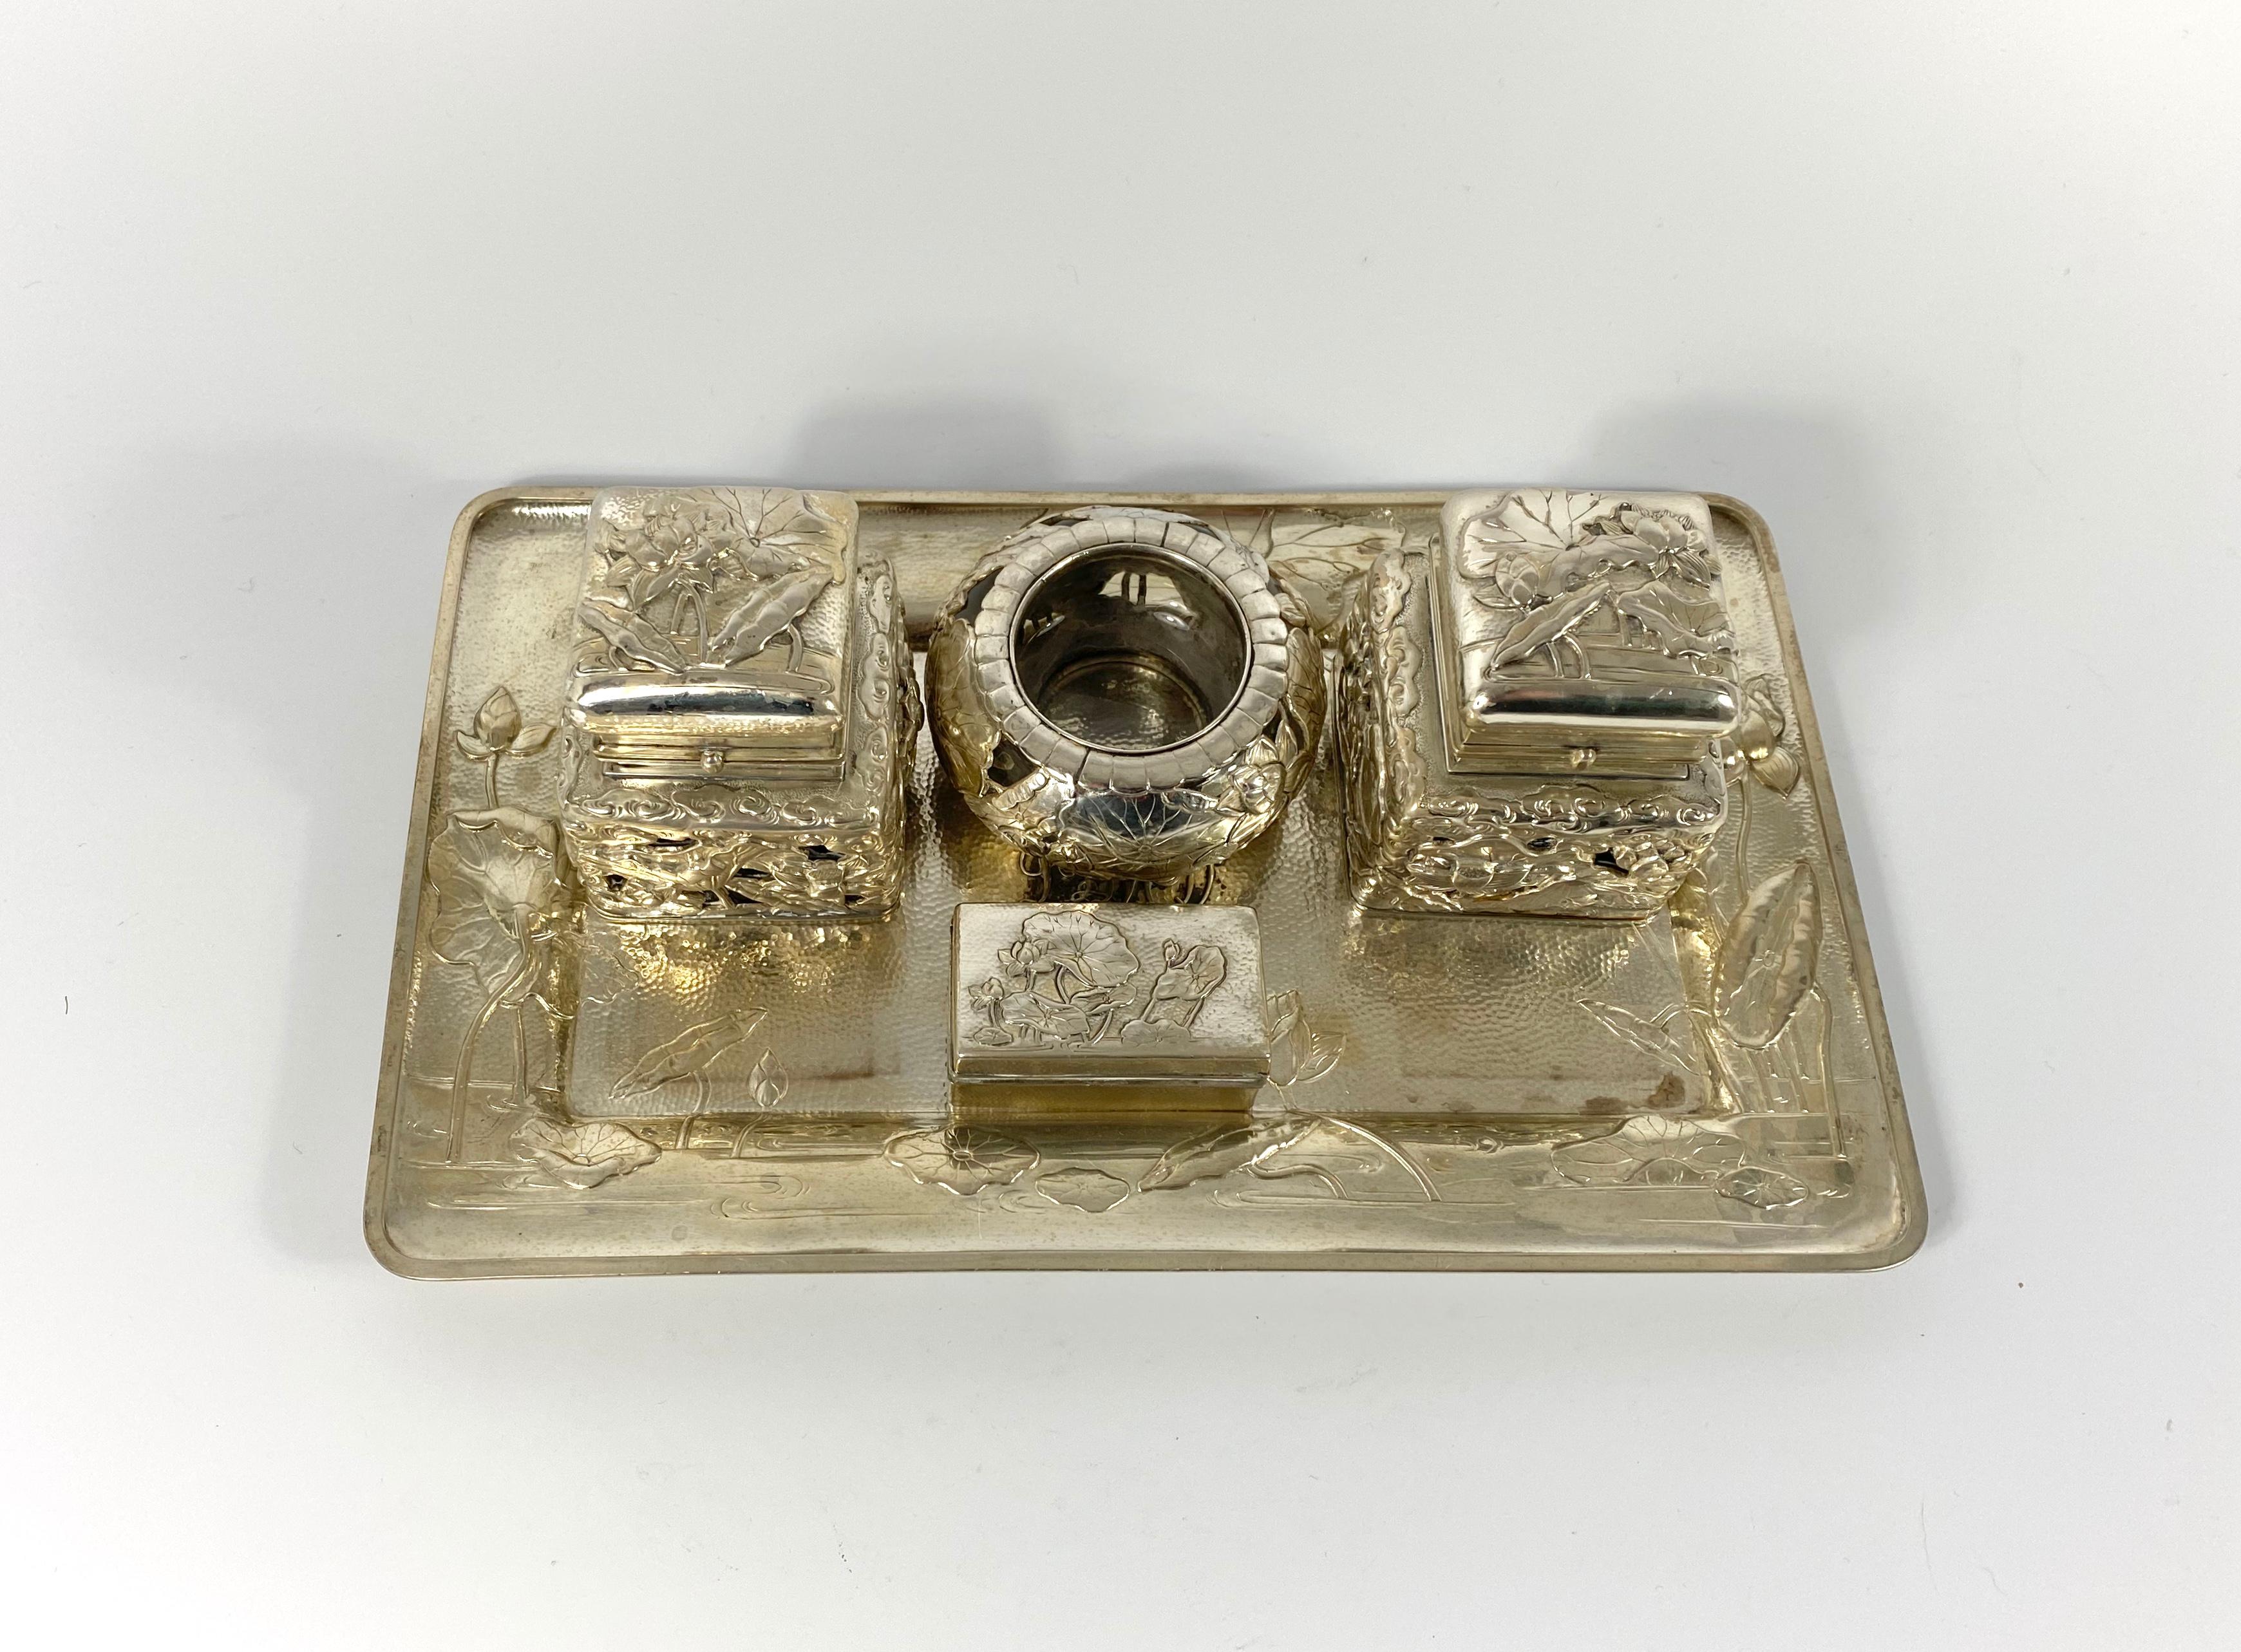 A fine and rare Arthur and Bond of Yokohama, silver inkstand, circa 1900. Meiji Period. The rectangular silver tray, chased and embossed with flowering lily pads on a river. Twin silver mounted glass inkwells; the pierced silver again decorated with